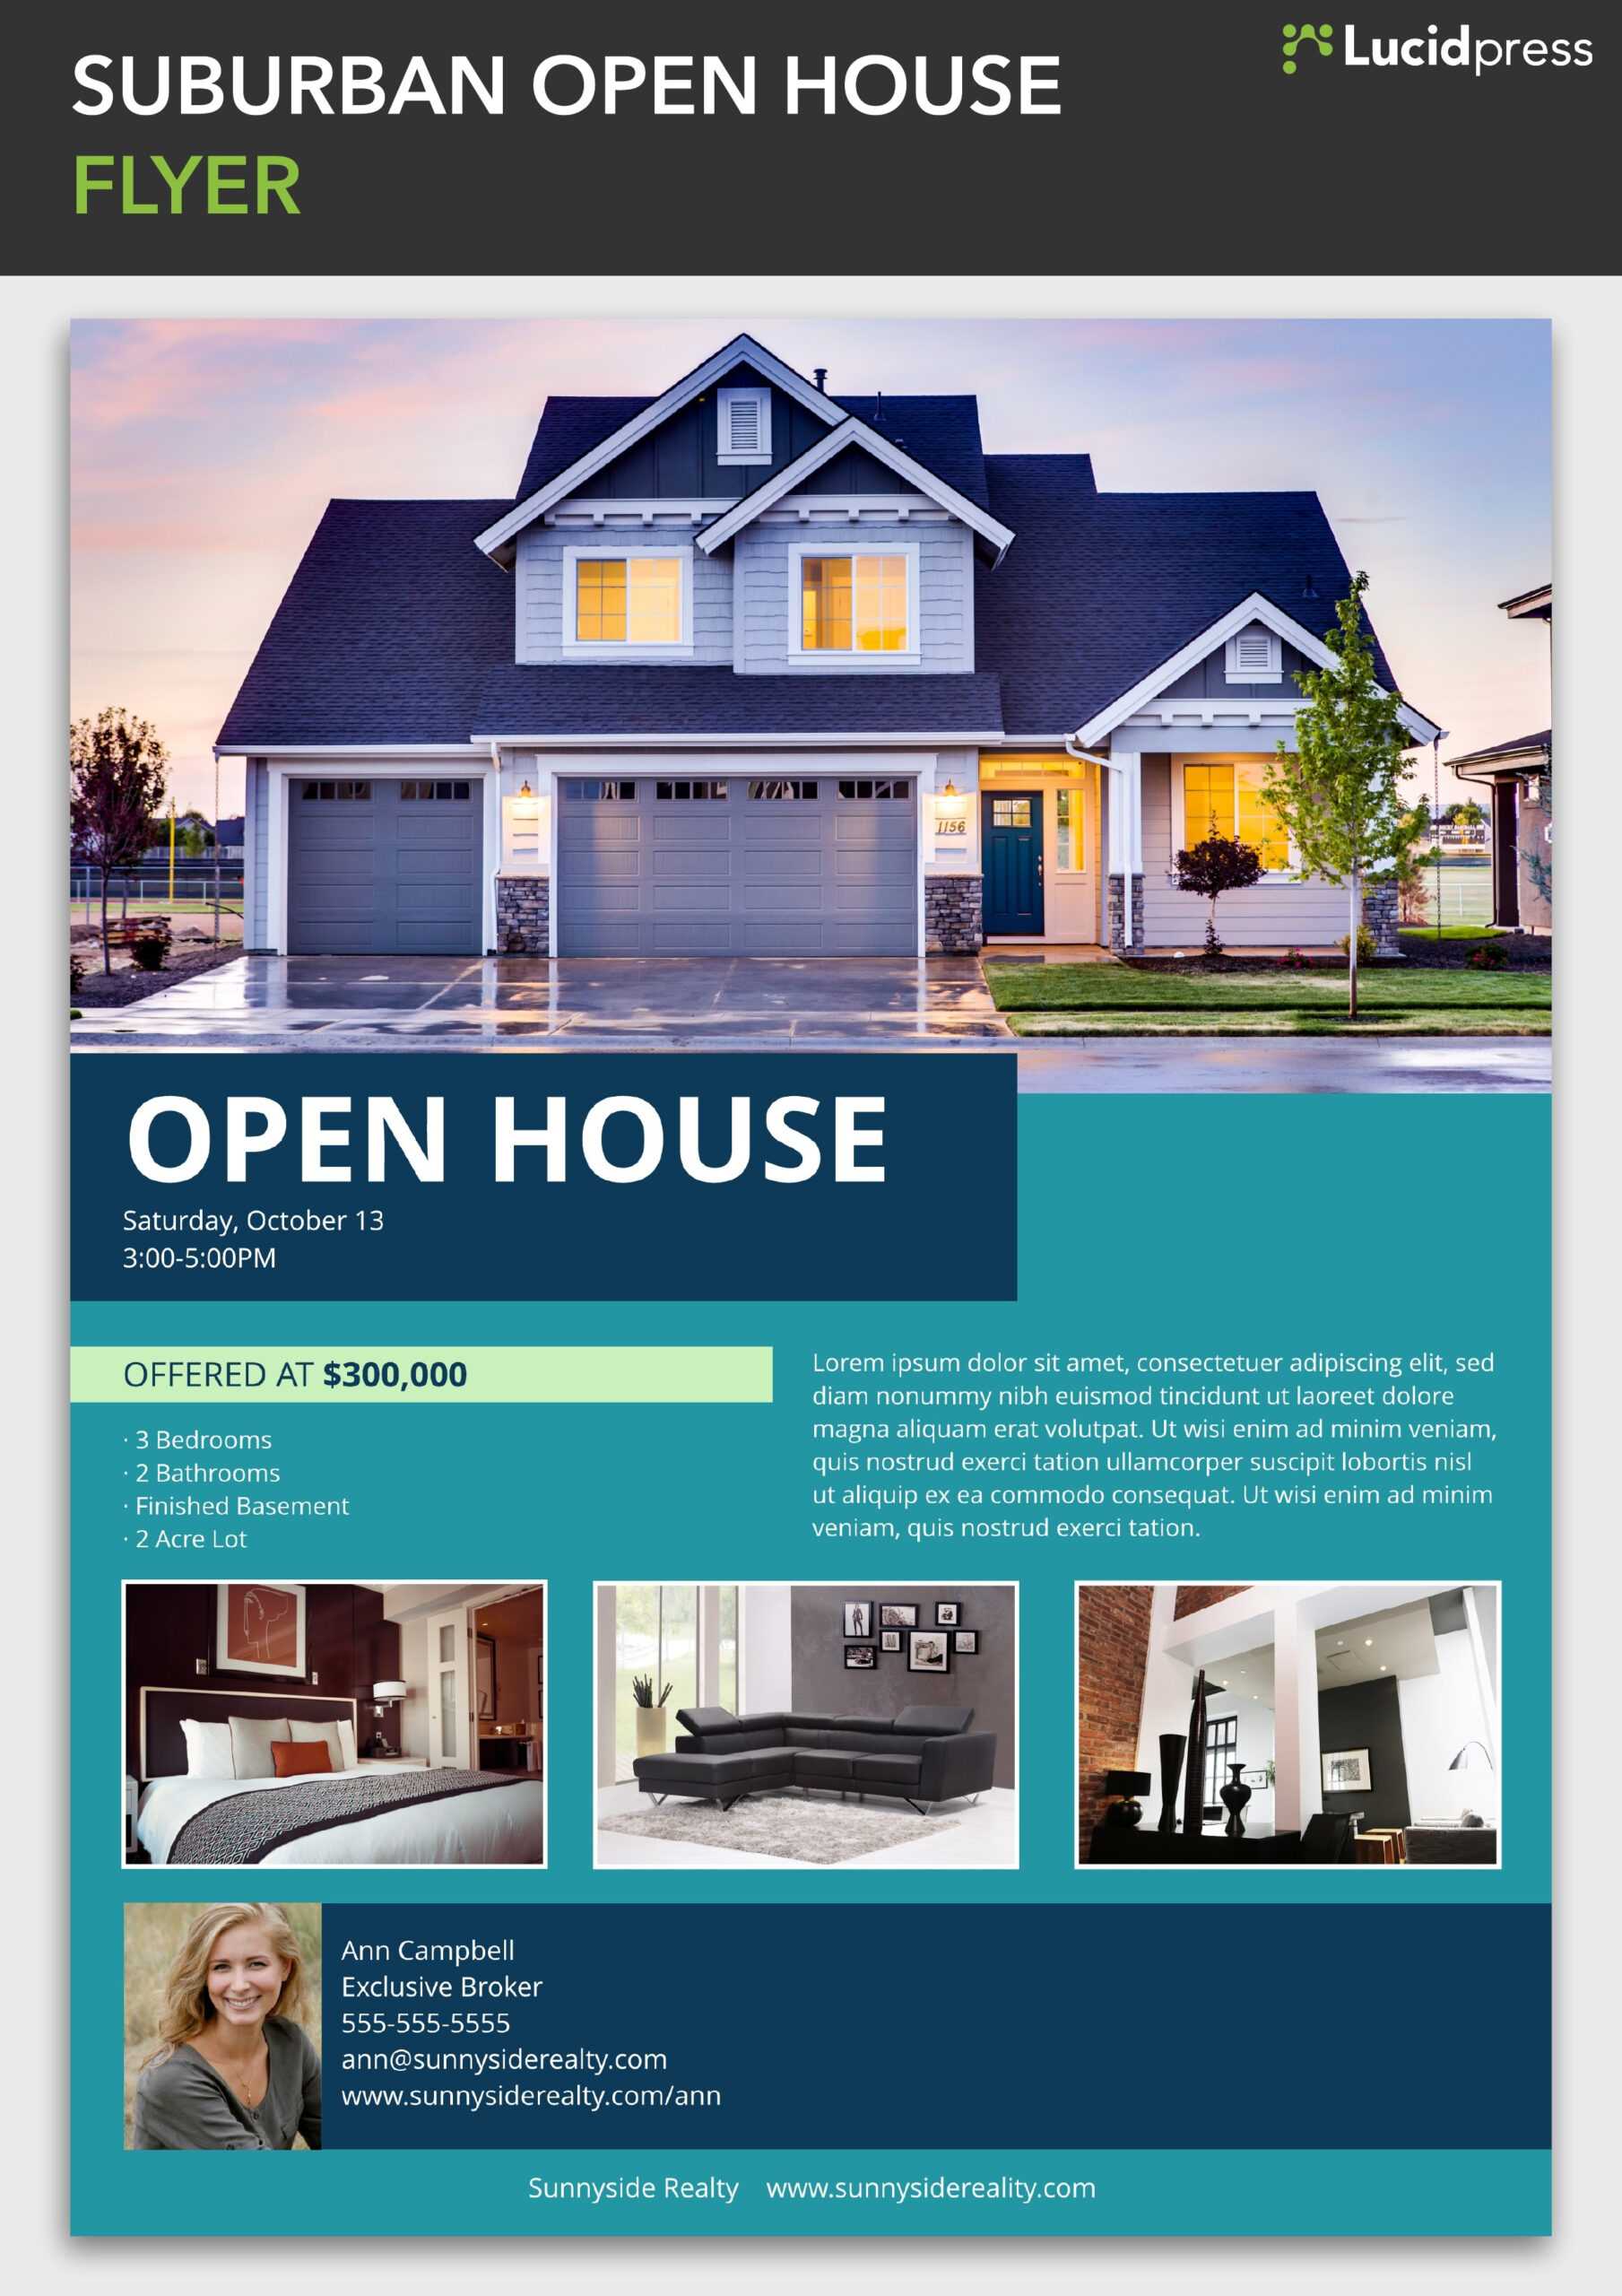 Flyer House - Colona.rsd7 for For Sale By Owner Flyer Template - Best